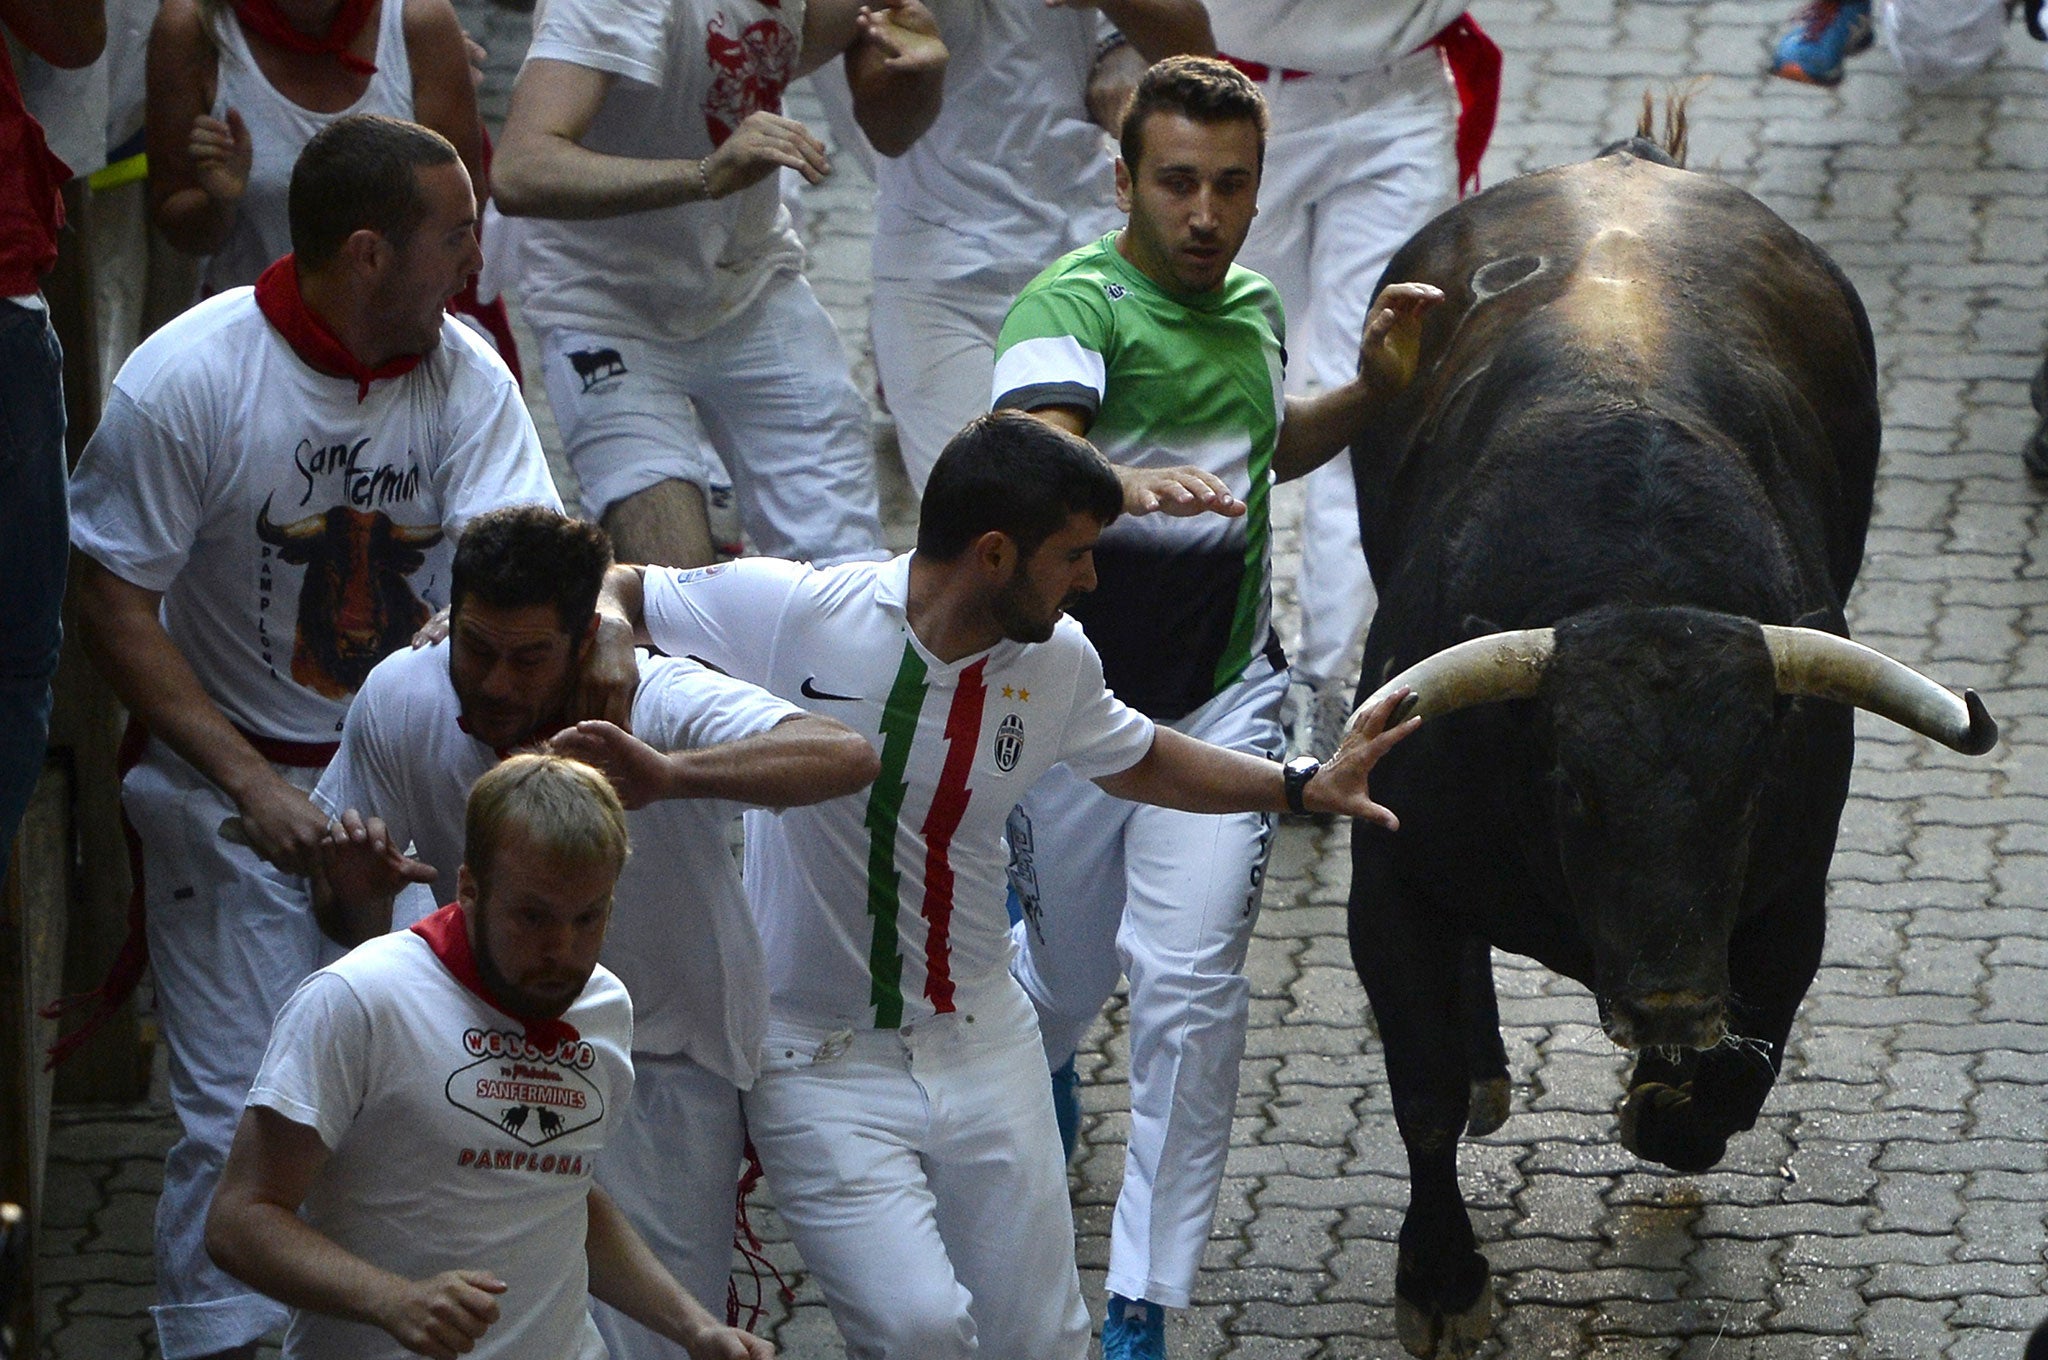 Participants run in front of Fuente Ymbro's bulls during the fourth 'encierro' (bull-run) of the San Fermin Festival in Pamplona